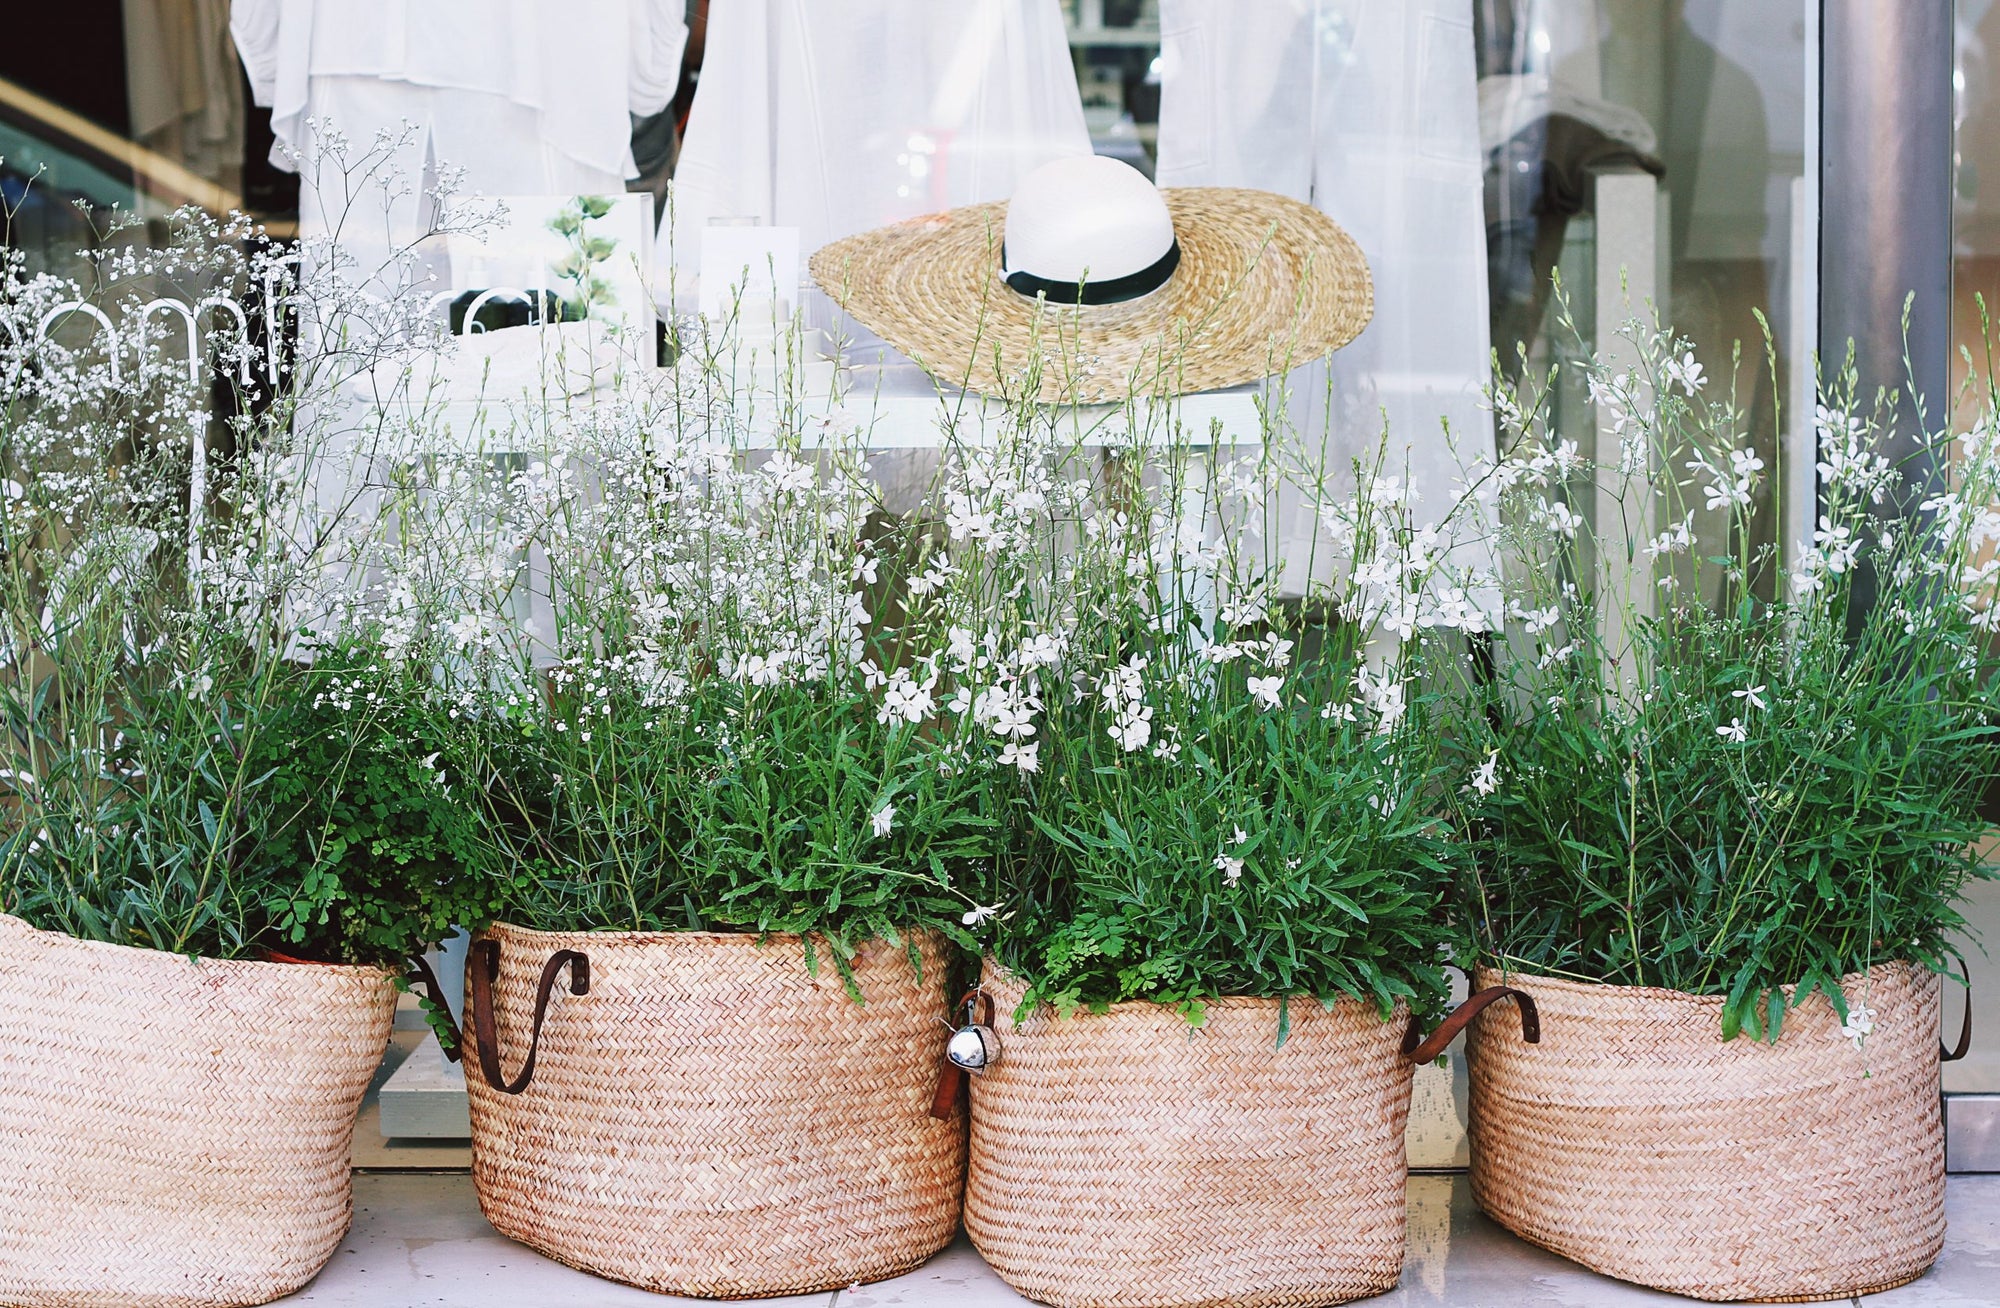 10 Sustainability Tips for Spring